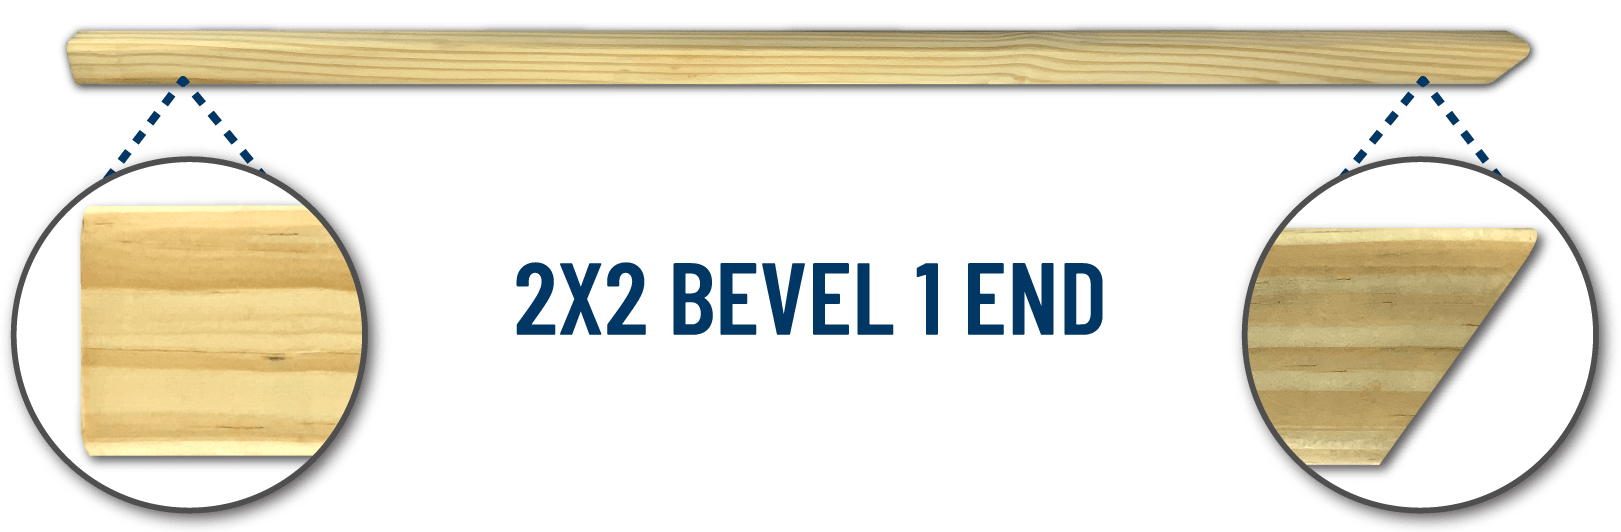 End-Breakout-Bevel-One-End